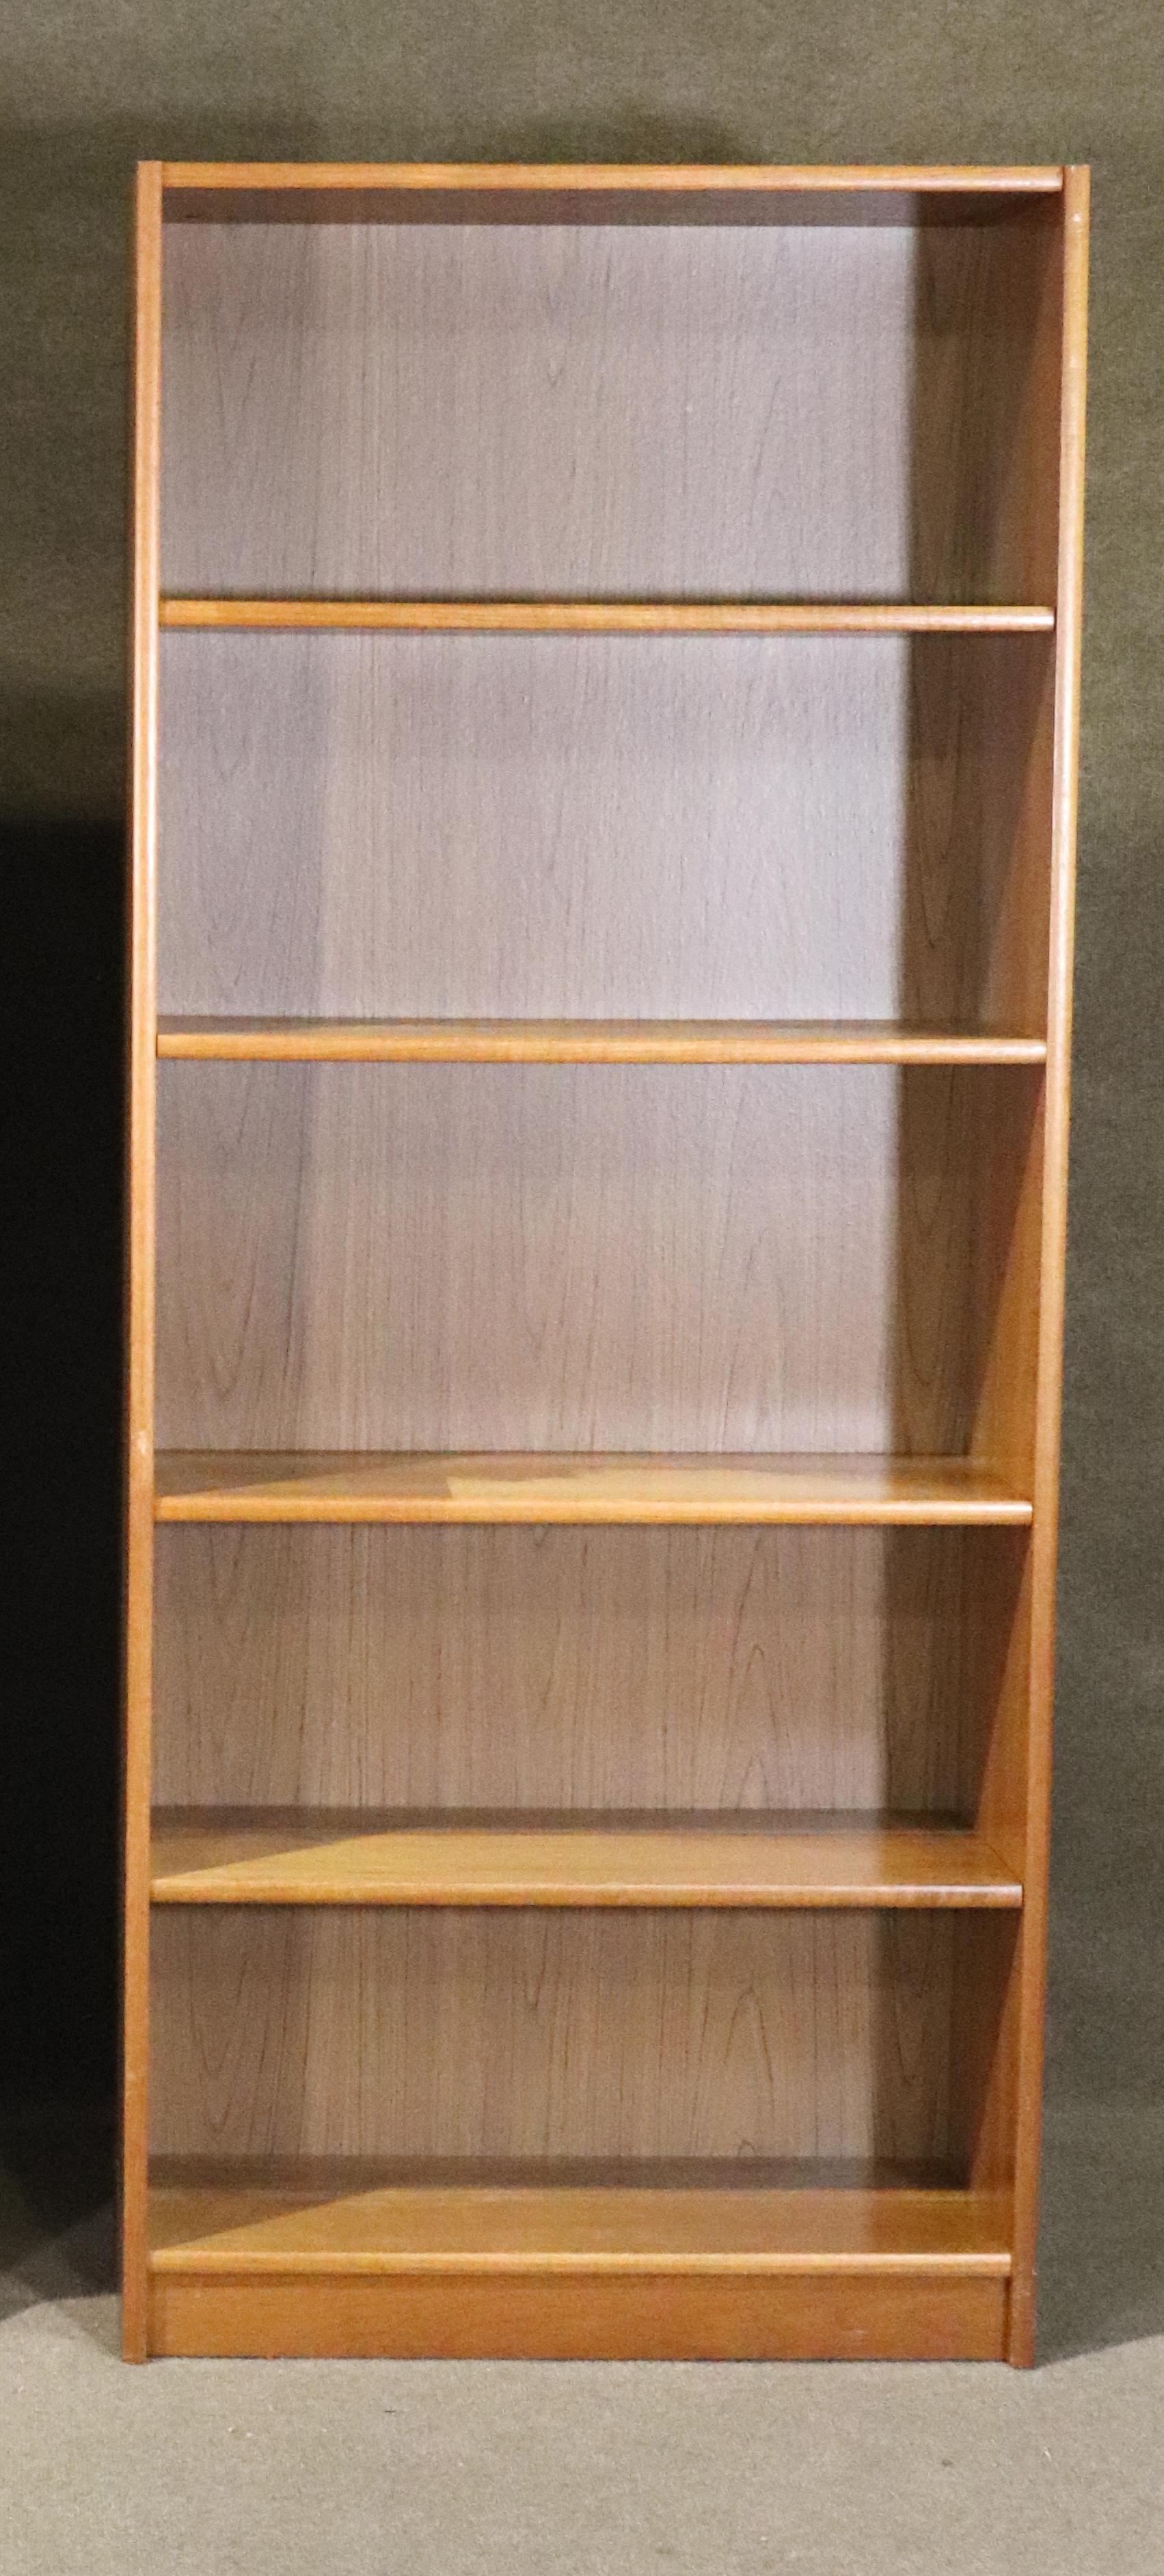 Tall teak veneer bookcase with five wide shelves. Ample storage for home or office.
Please confirm location NY or NJ